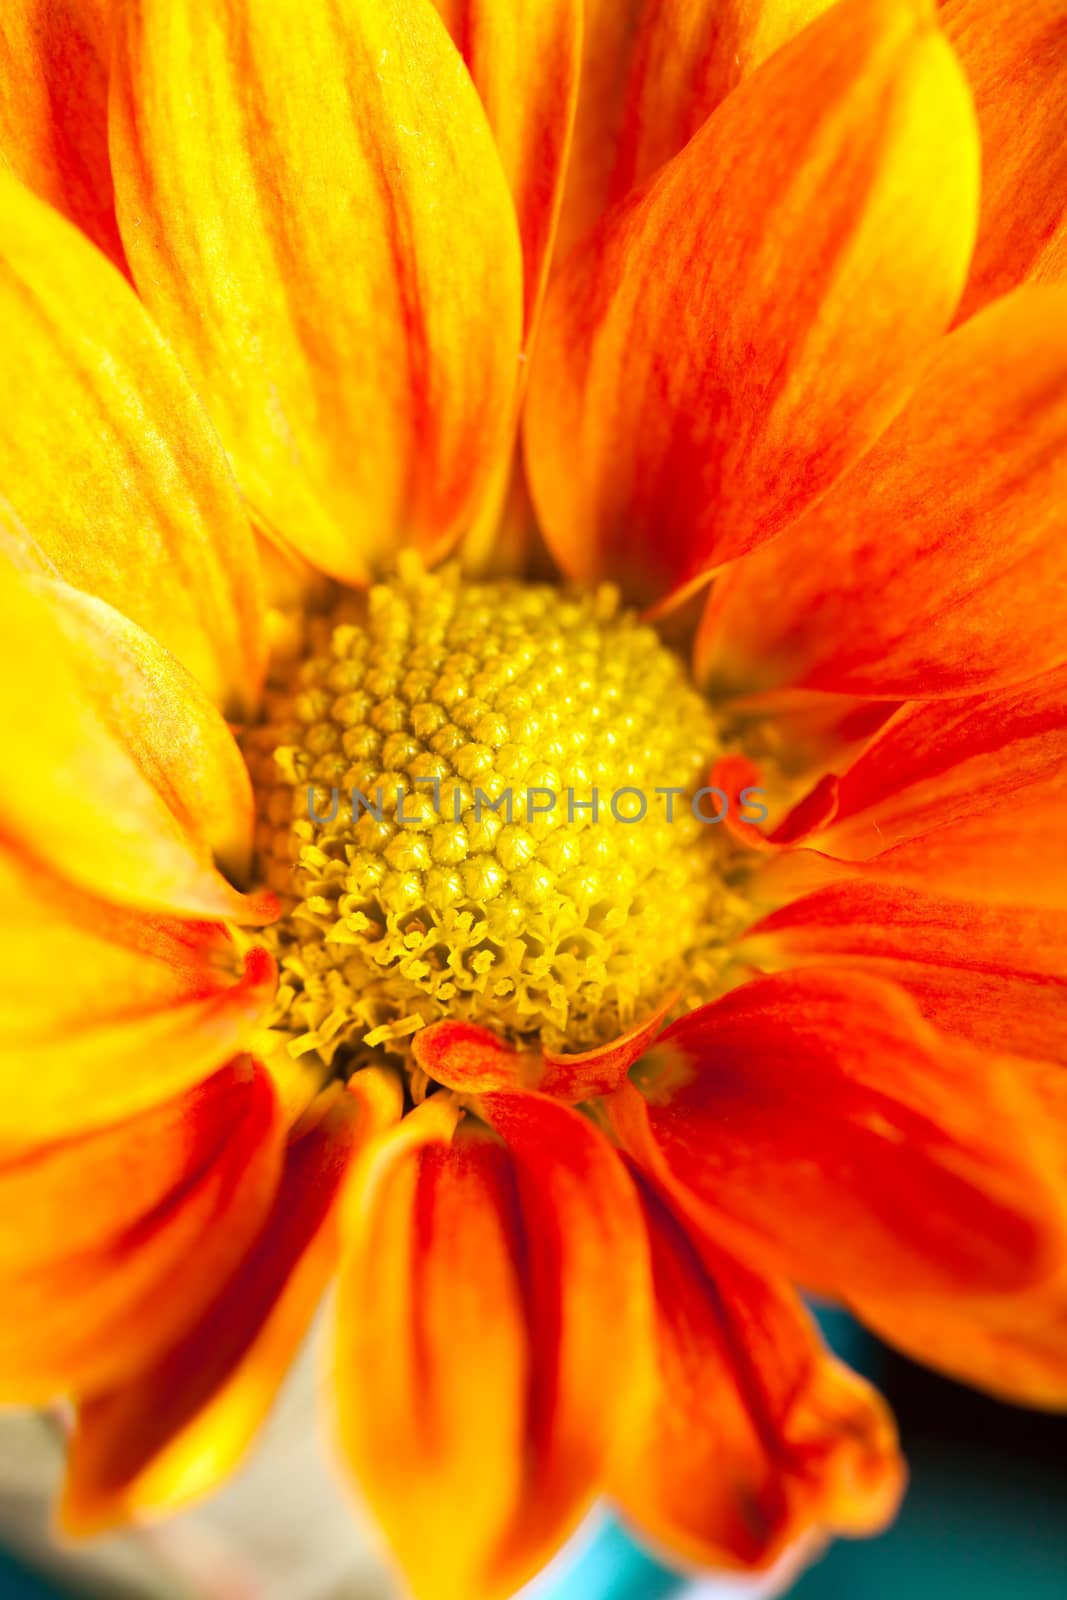 Close up macro view of a yellow flower.  Shallow depth of field.